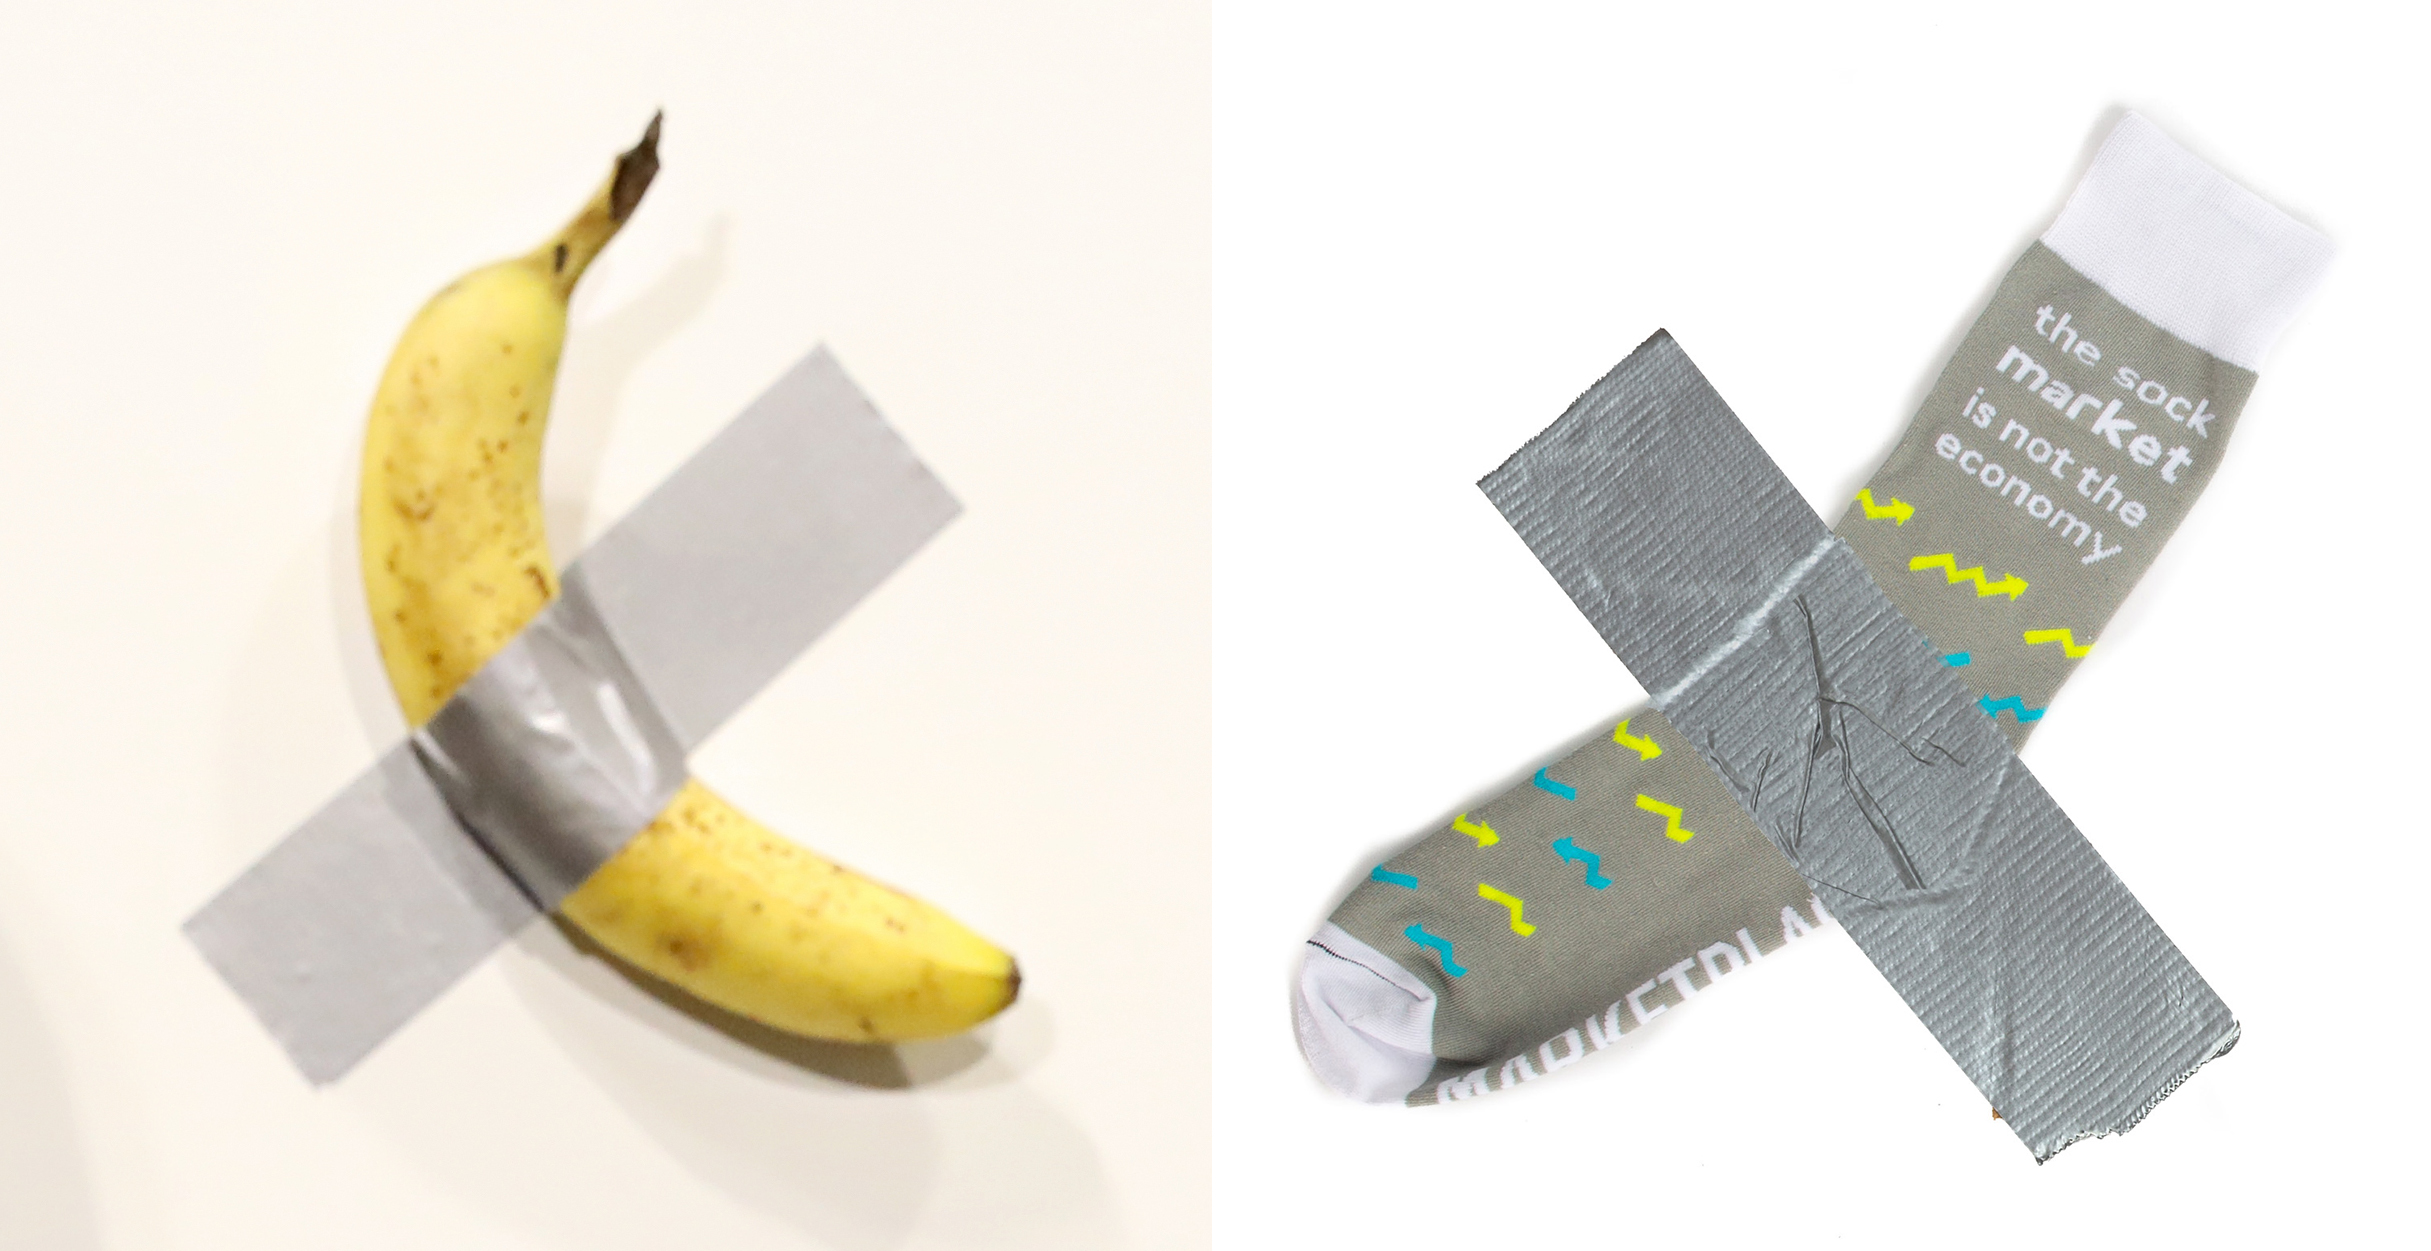 Maurizio Cattelan’s “Comedian” and Marketplace's branded sock.